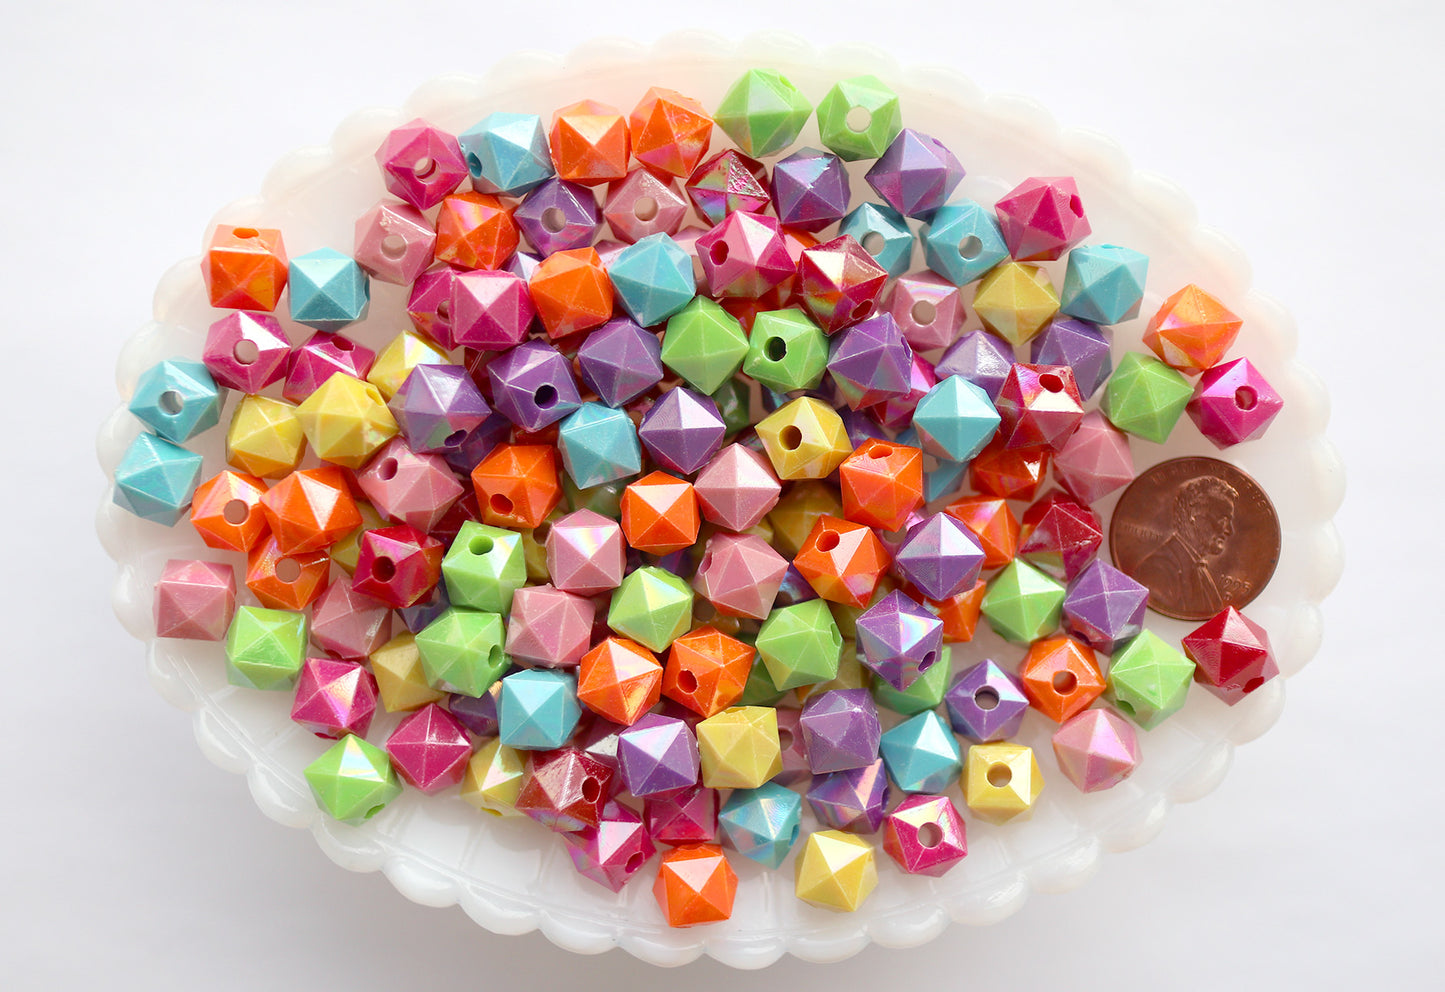 Cube Beads - 10mm Bright Color Faceted AB Cube Acrylic Square Transparent Plastic Beads - 100 pc set